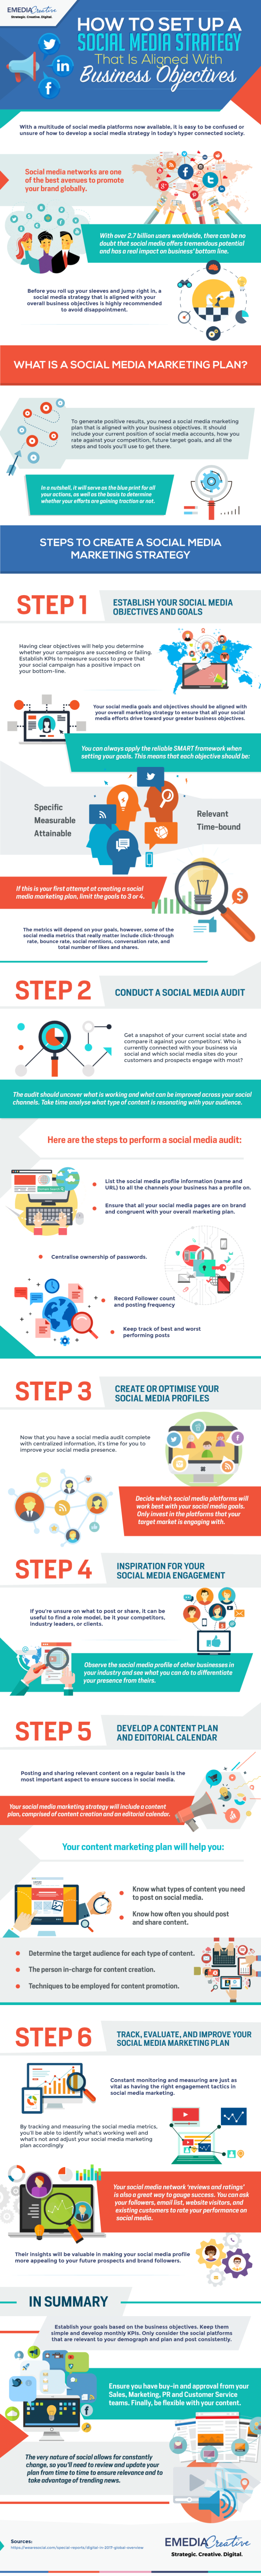 How to Design a Social Media Strategy Aligned With Your Specific Business Objectives [Infographic]